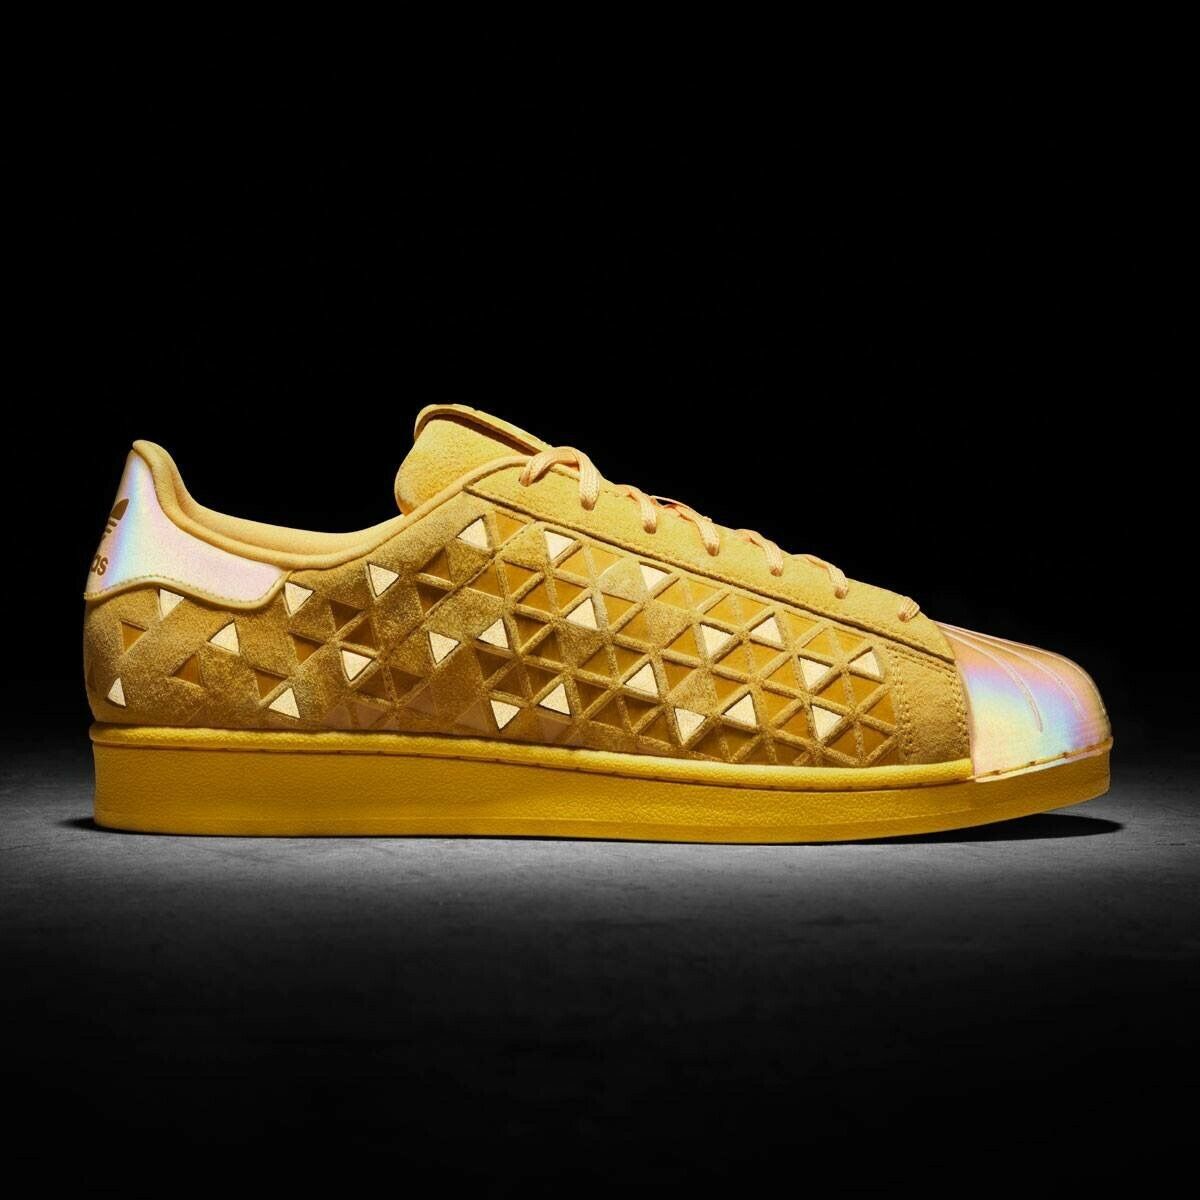 Adidas Superstar Juniors Xeno Gold Reflective Yellow Shoes Size 5Y